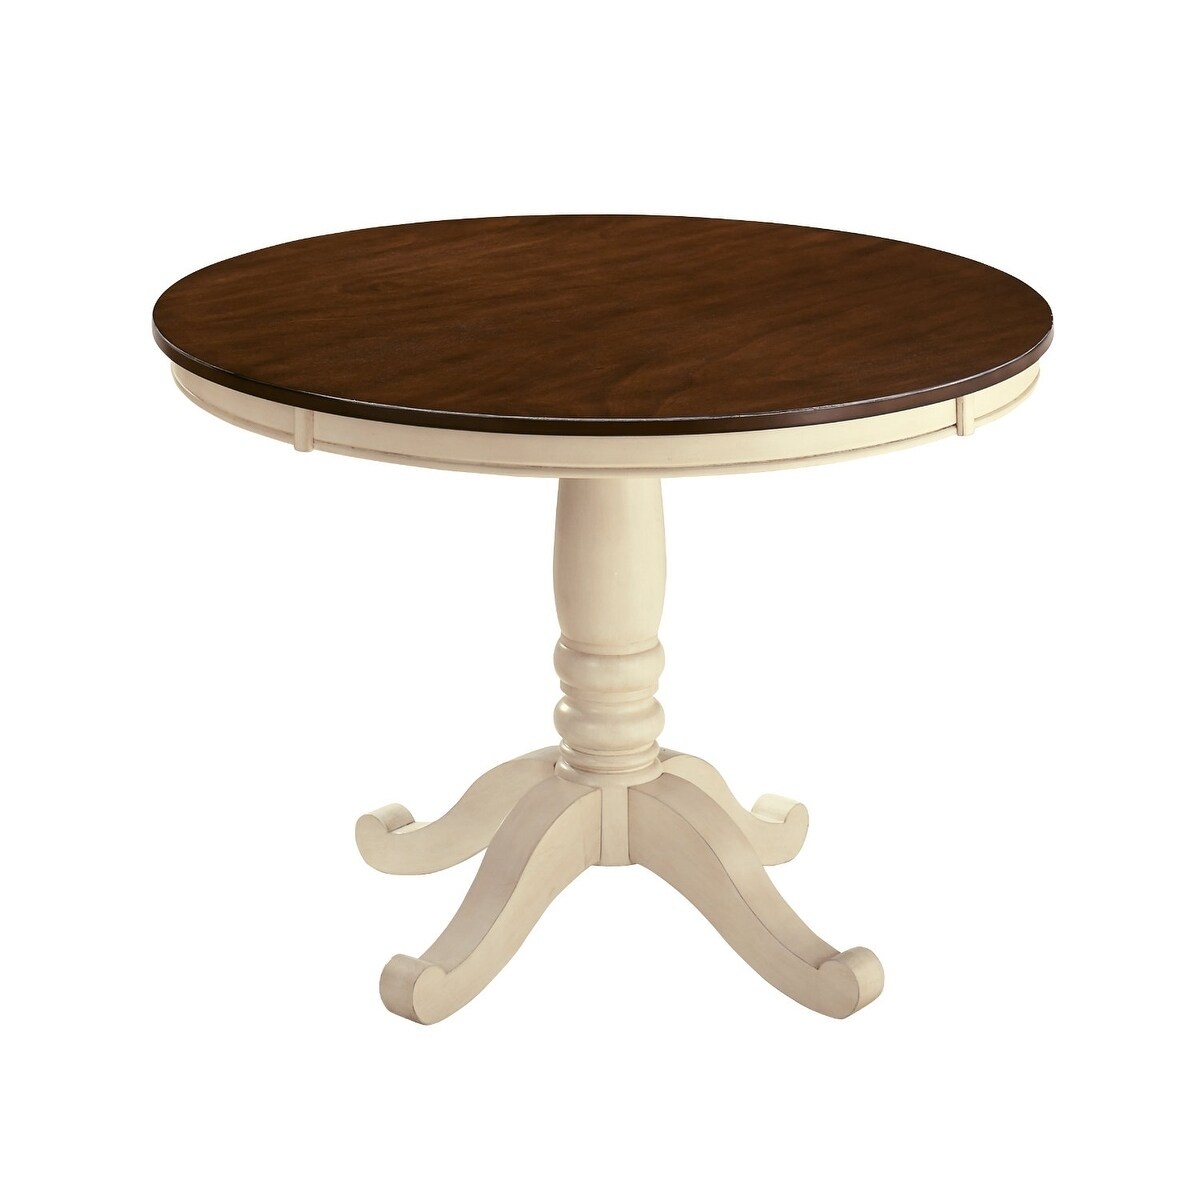 Signature Design By Ashley Whitesburg Round Dining Room Table